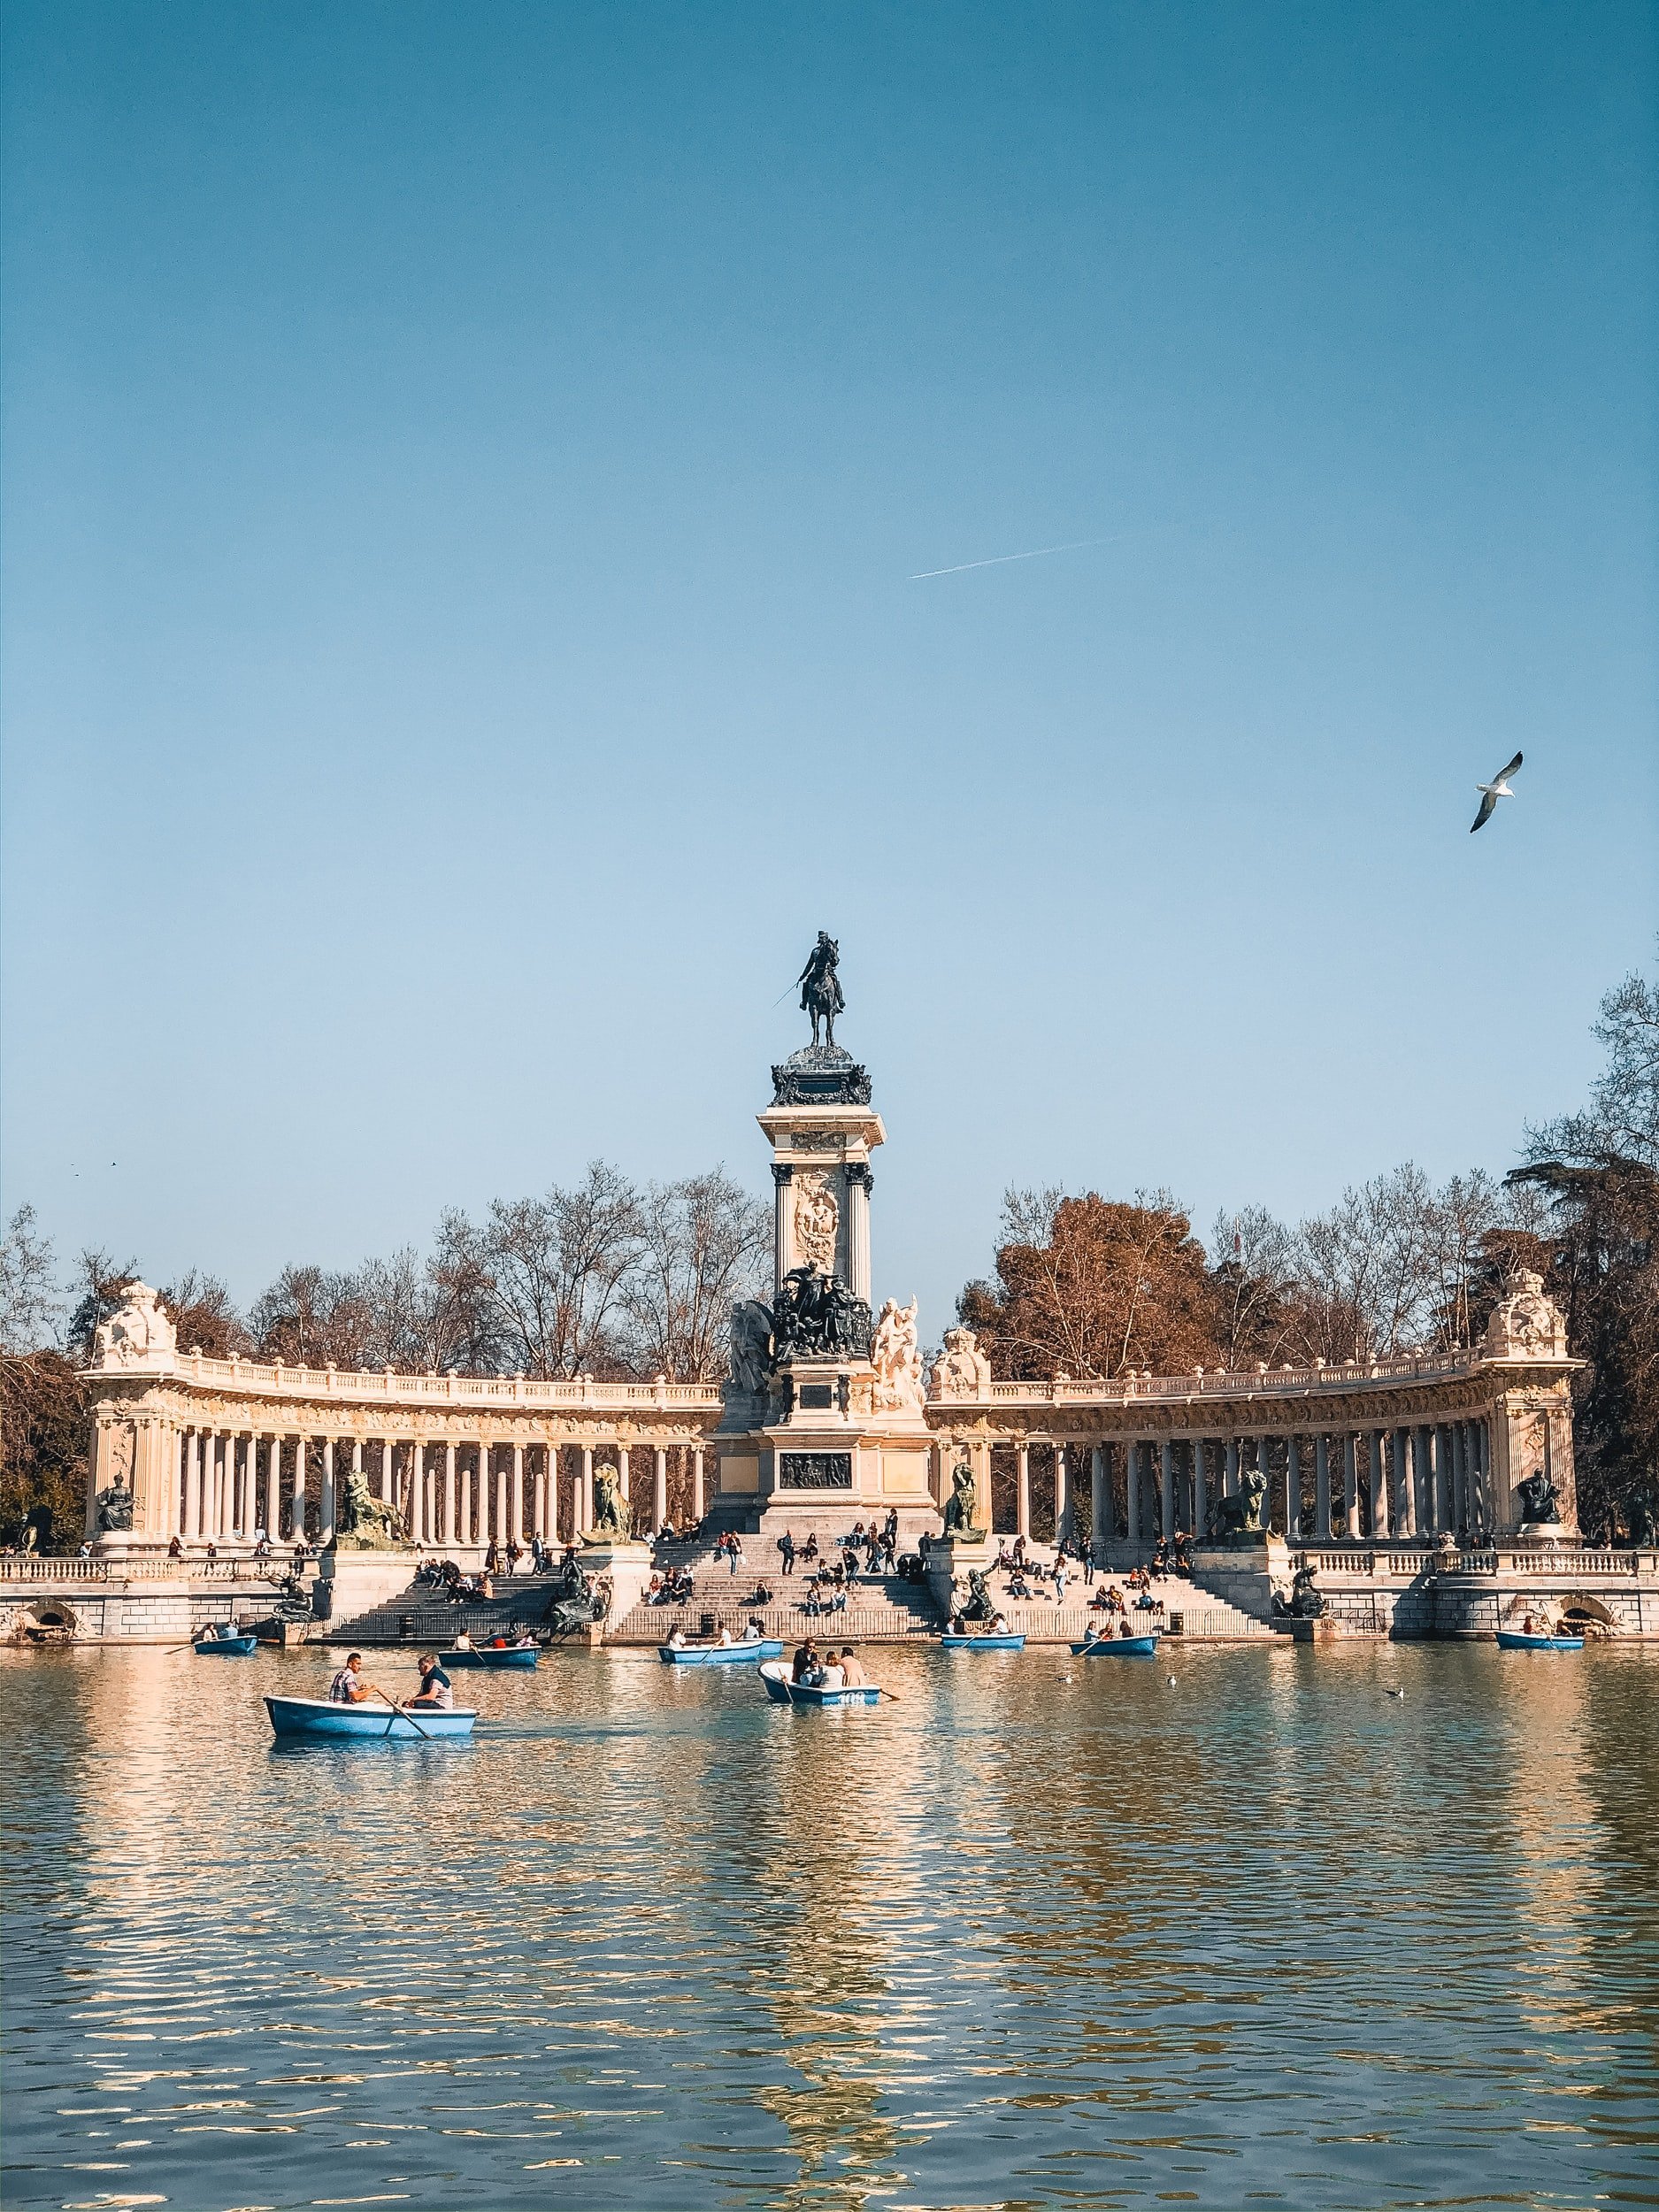 Explore Madrid Like a Local - The Ultimate Insiders' Travel Guide unsplash image